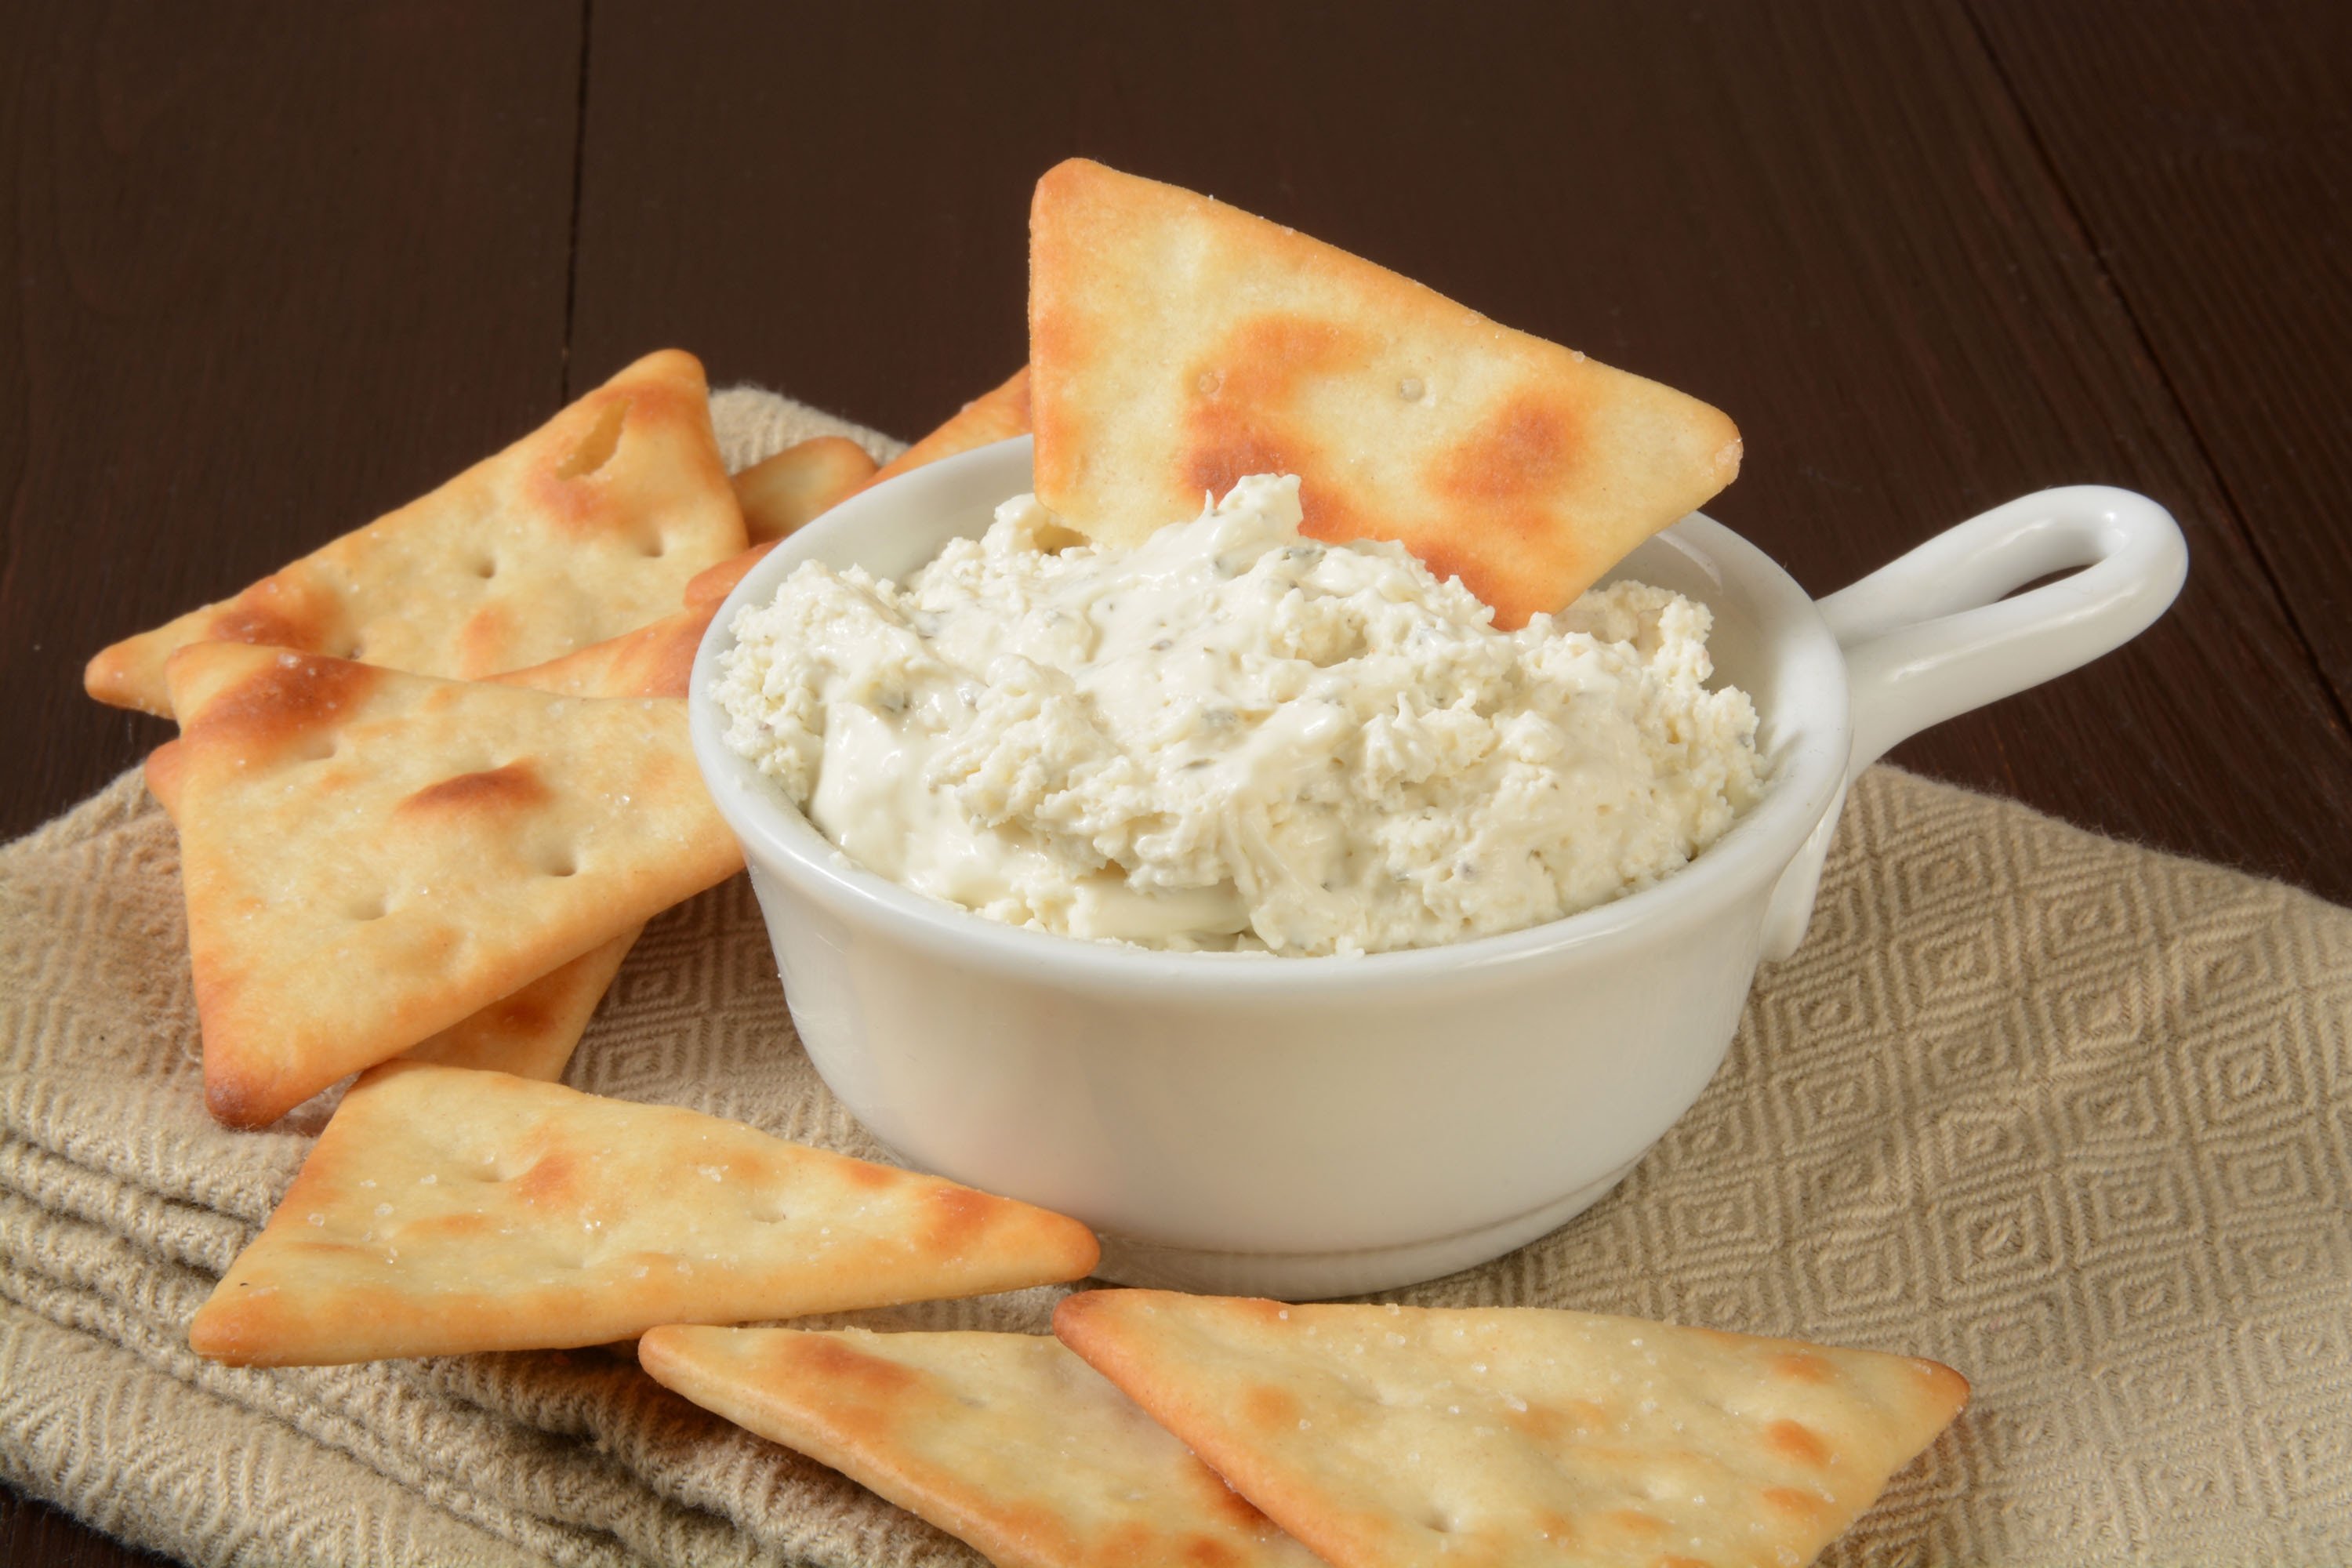 You can pair your plain crackers with a cream cheese dip. (Shutterstock)